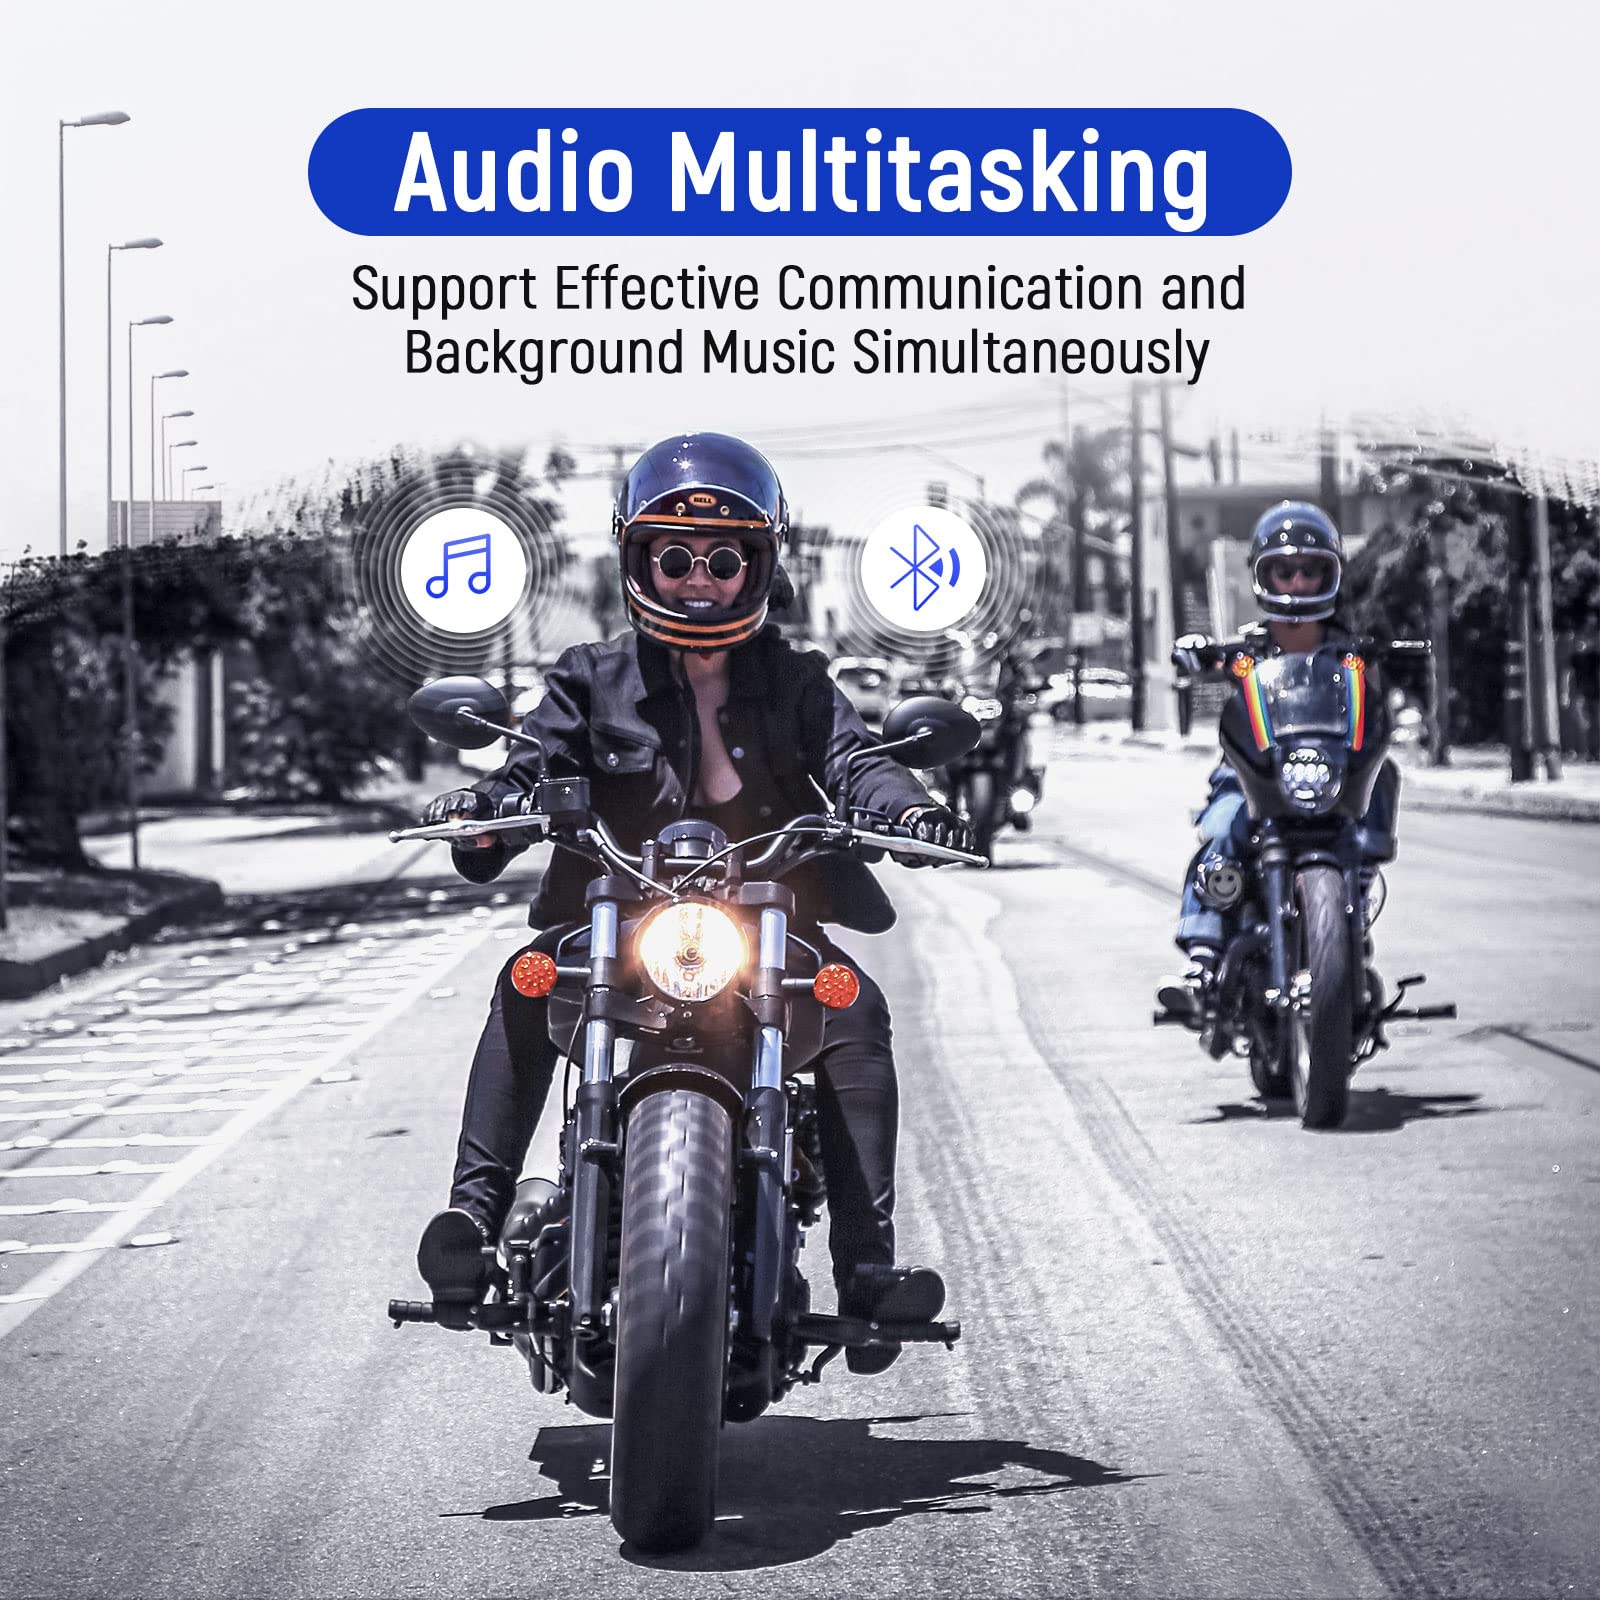 LEXIN GTX Motorcycle Bluetooth Headset, 10 Riders Helmet Intercom Communication Systems, Support Audio Multitasking, Noise Cancellation, IP67 Waterproof, Fast Charging, Universal Pairing, 4 Pack